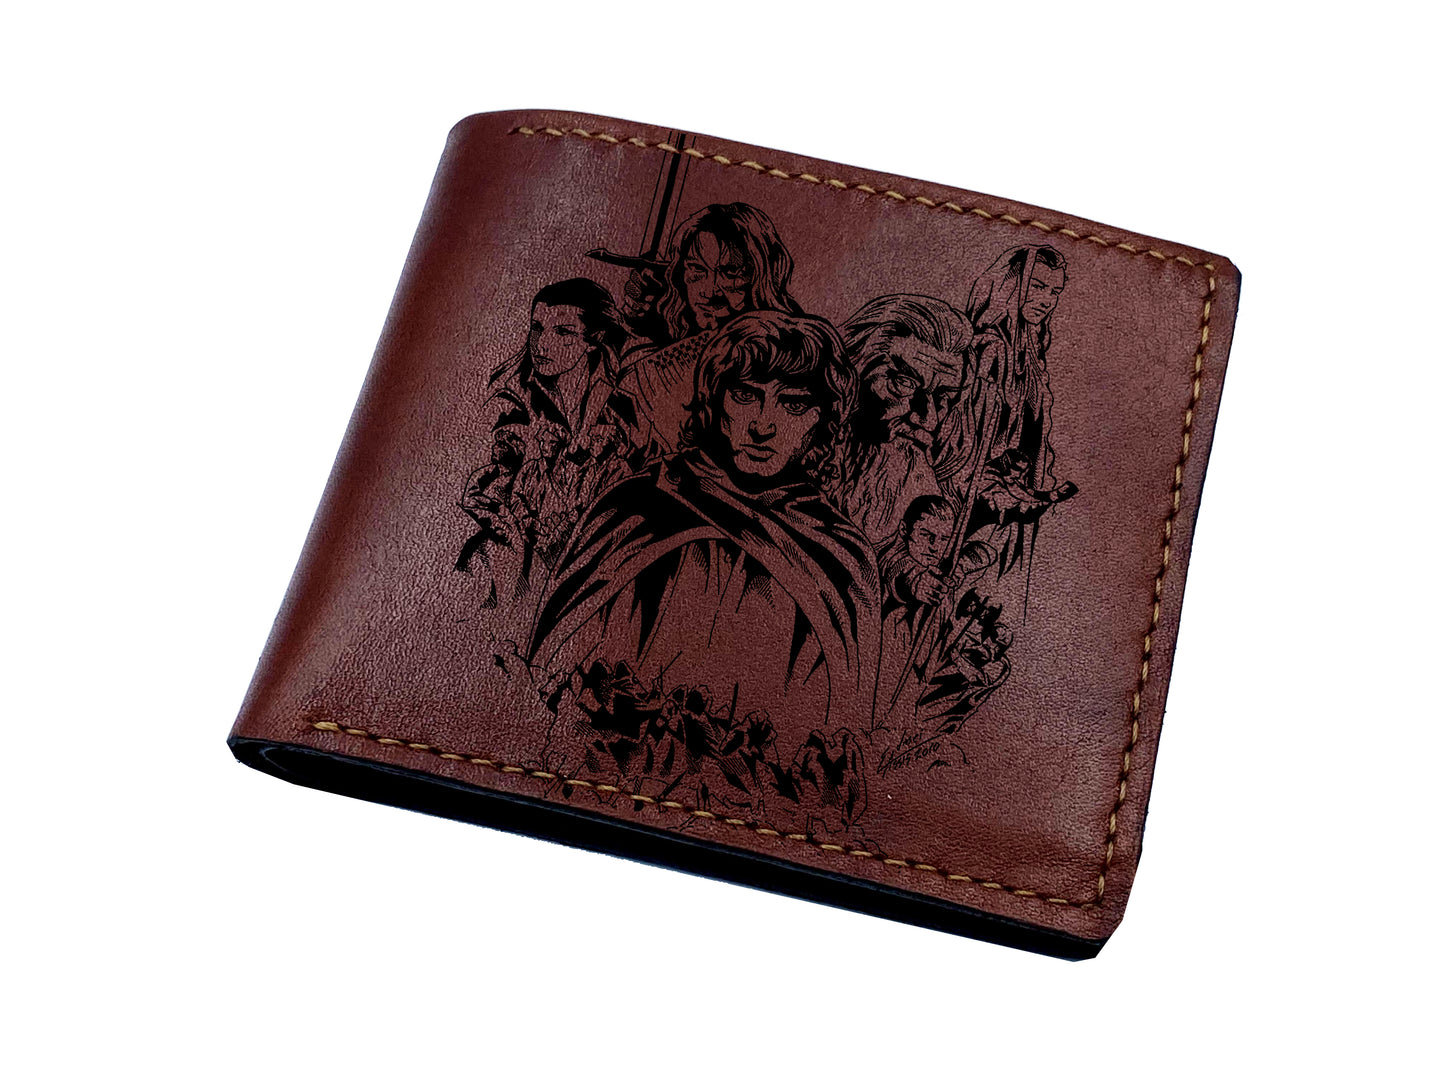 Mayan Corner - The Lord of the Rings leather handmade wallet, characters of the series, Frodo Gandalf drawing art wallet, leather gift for LOTR fan